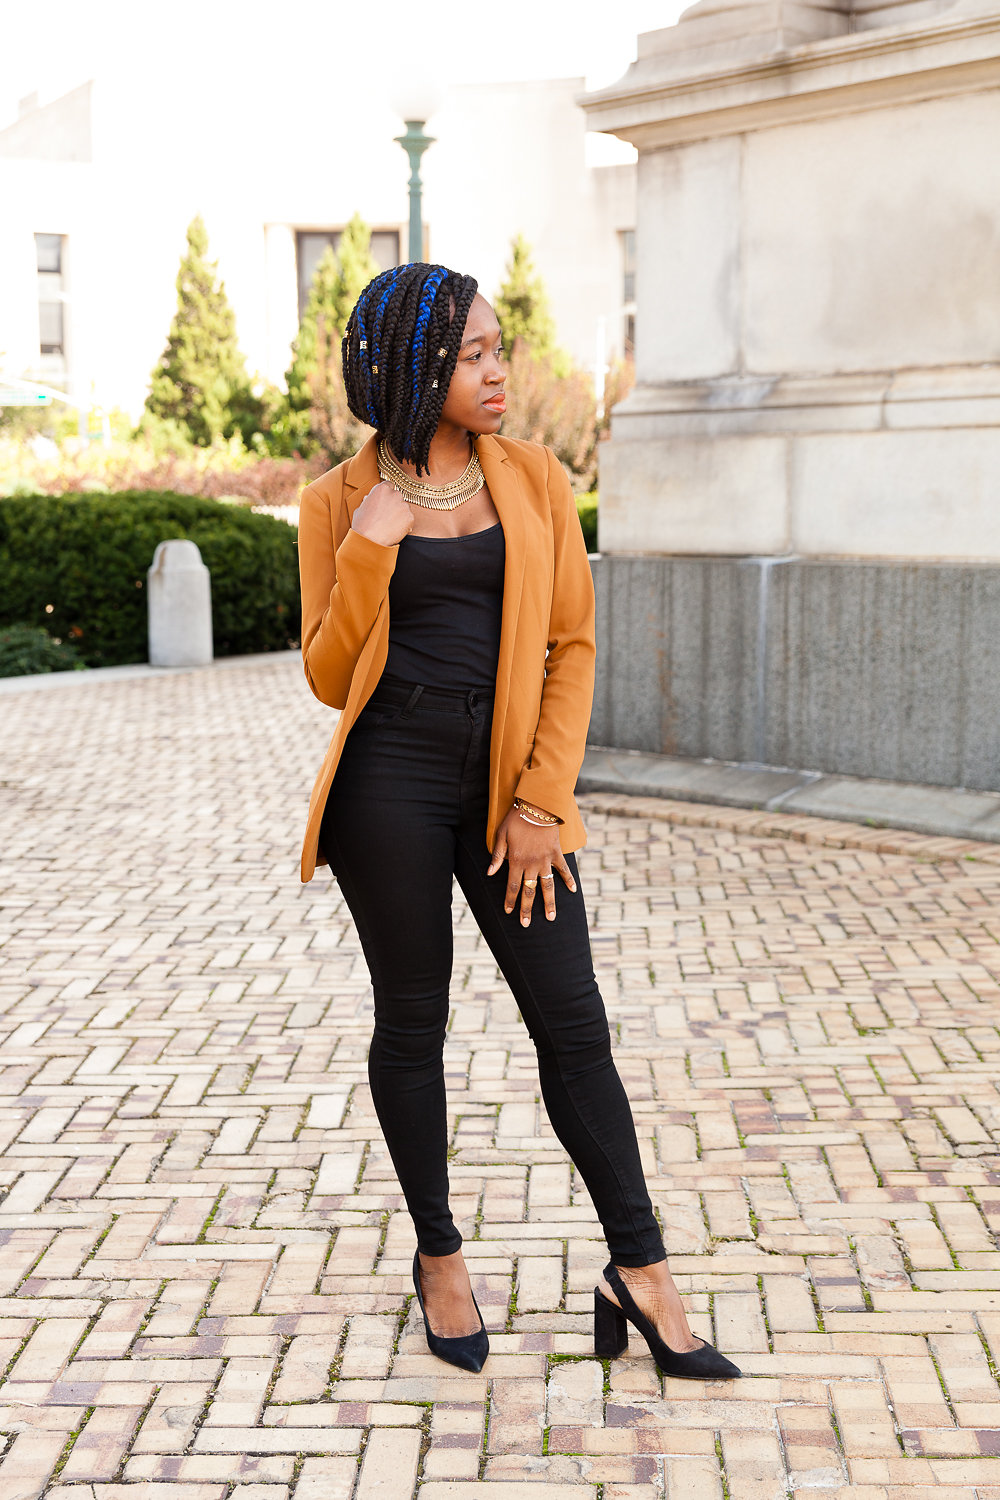 How to wear a blazer in a non-corporate, innovative way! — Style IngeNEWity